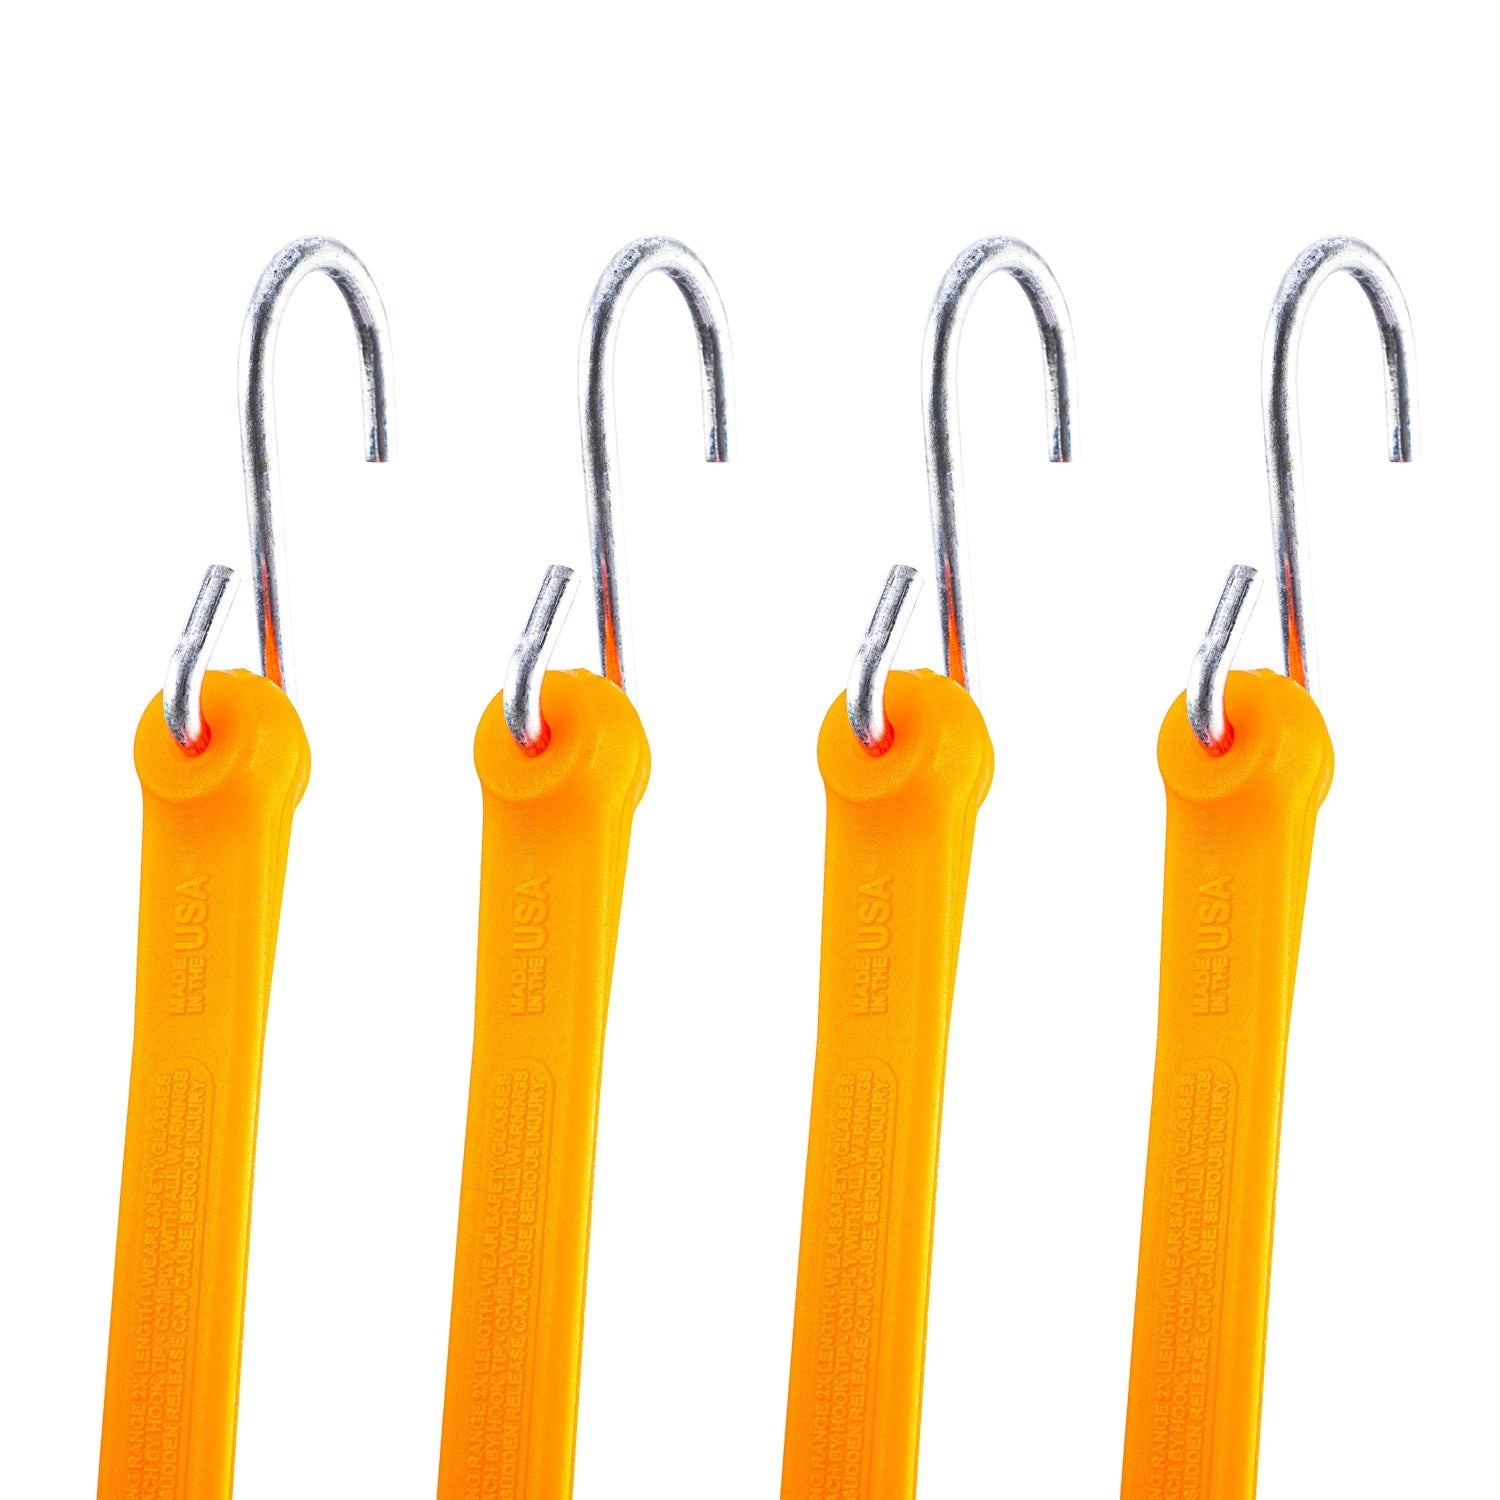 12" Heavy Duty Bungee Strap 4 Pack - The Perfect Bungee & ShockStrap Tie Downs